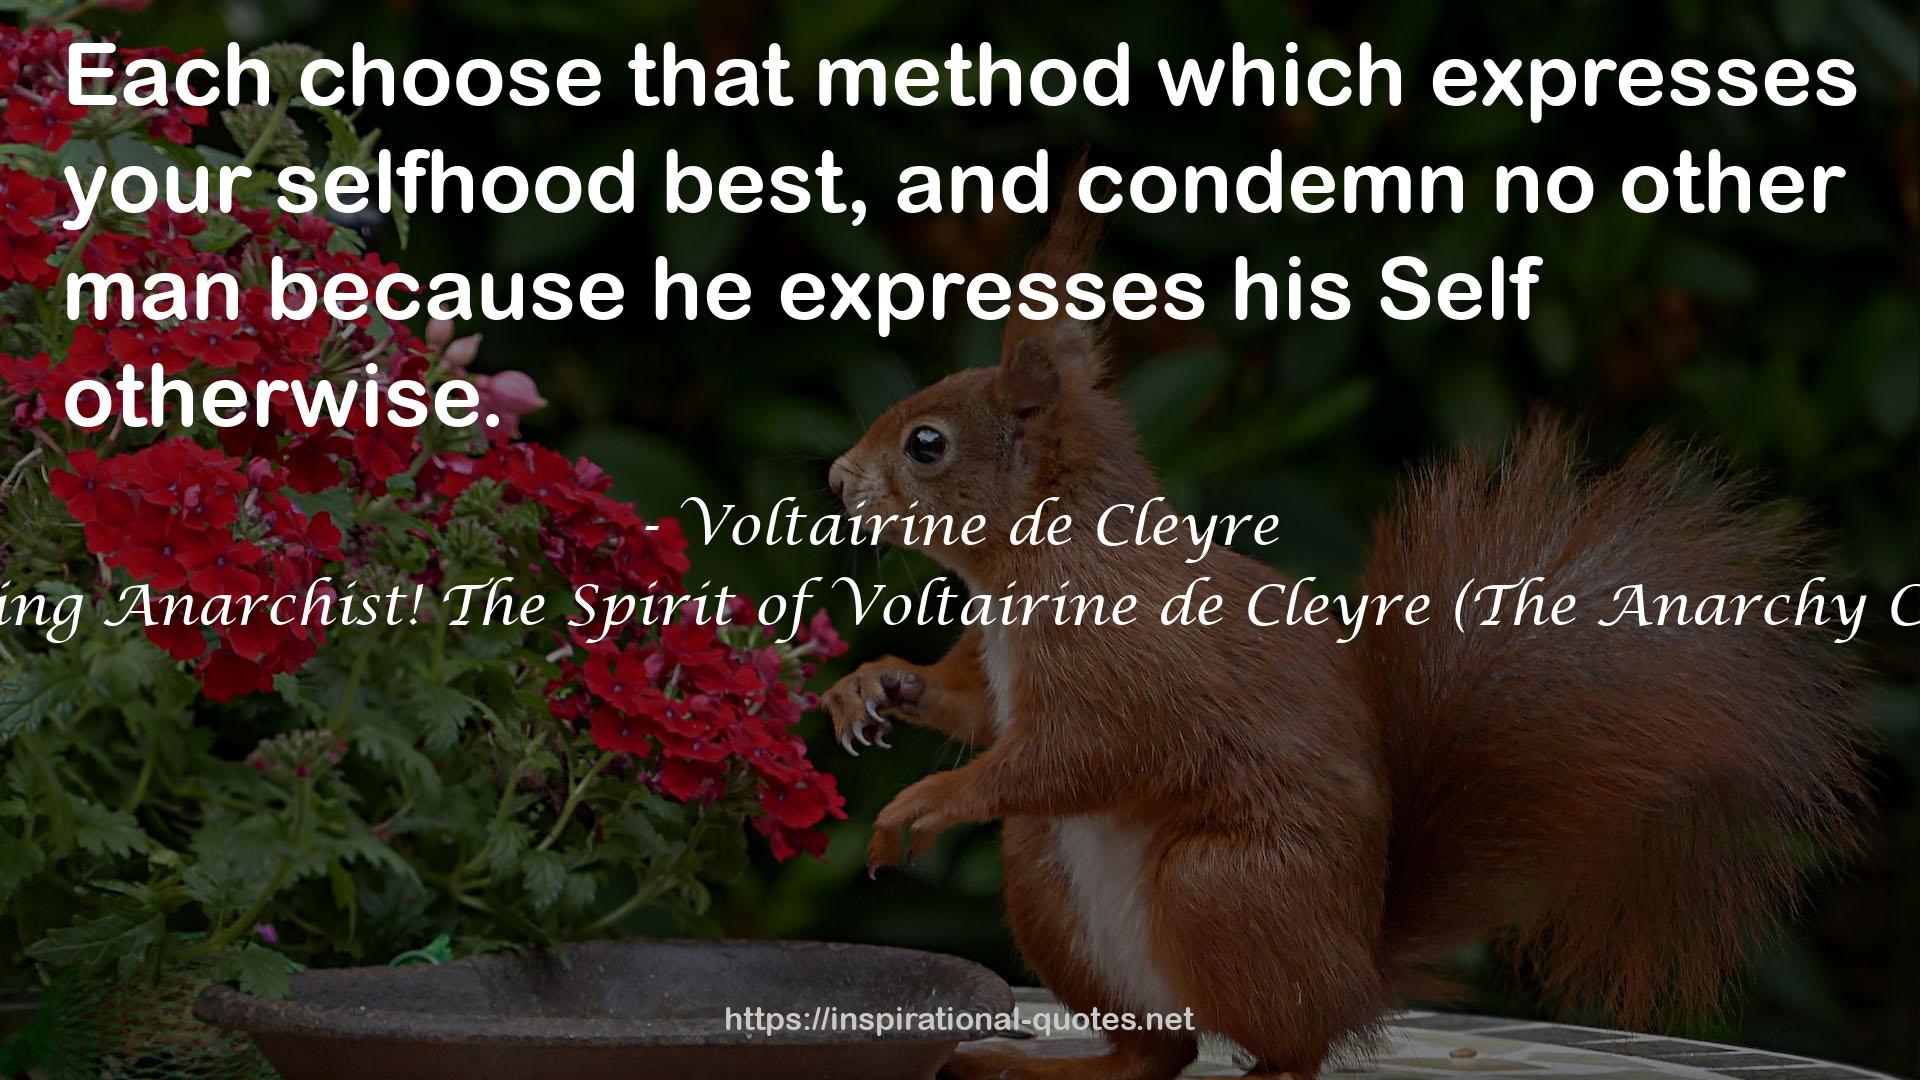 A Loving Anarchist! The Spirit of Voltairine de Cleyre (The Anarchy Classic!) QUOTES